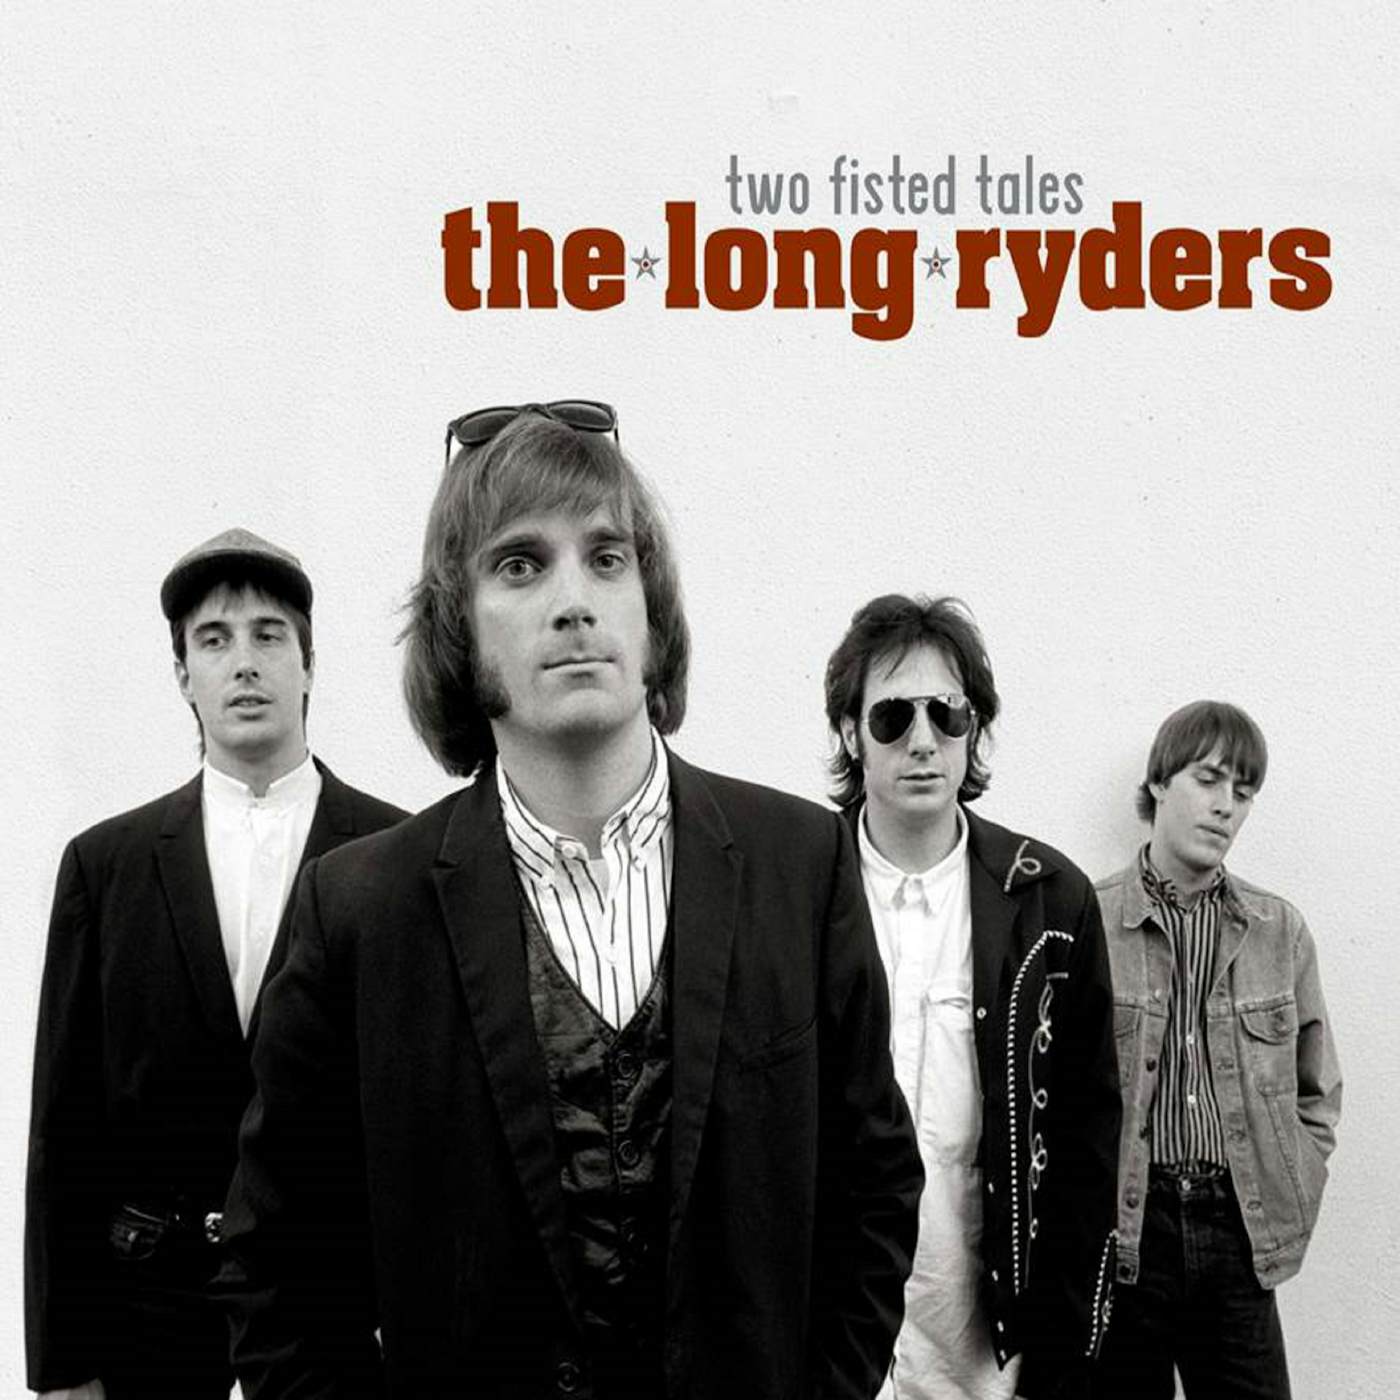 The Long Ryders TWO FISTED TALES CD